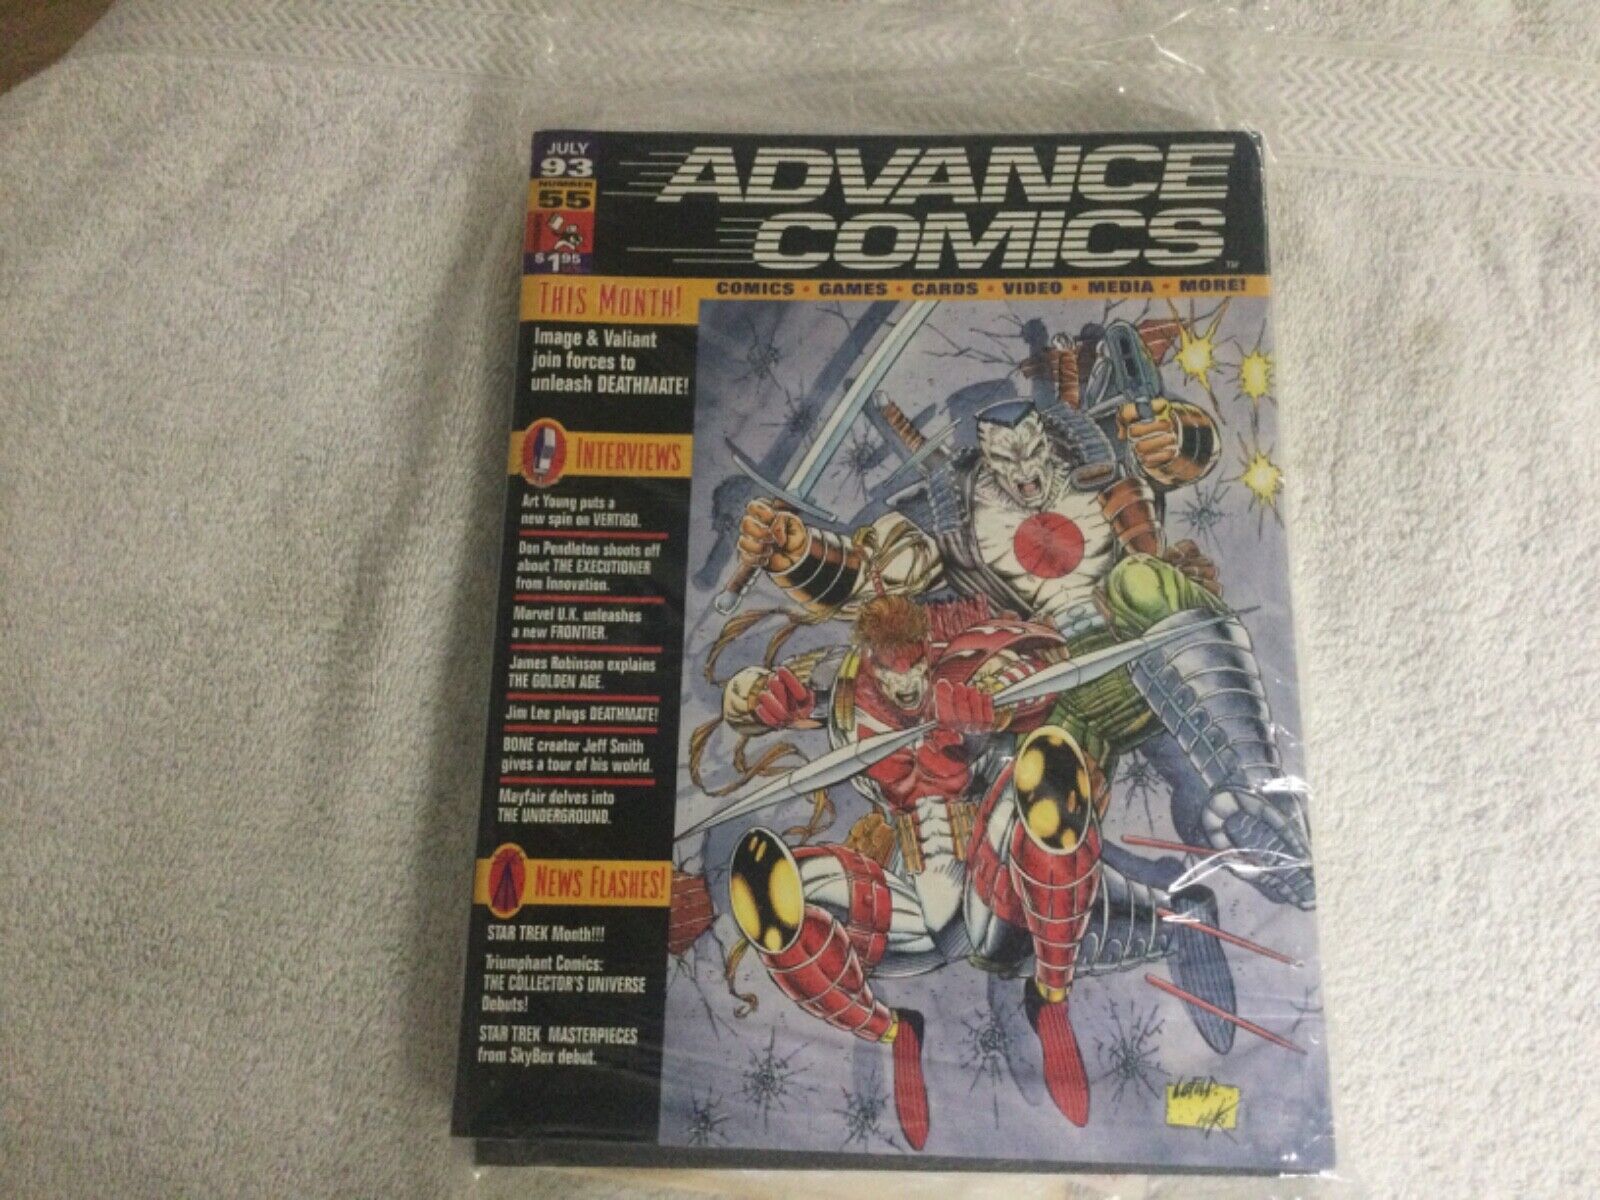 RARE NEW VINTAGE JULY 1993 ADVANCE COMICS #55 WITH PROMOS FACTORY SEALED BAG